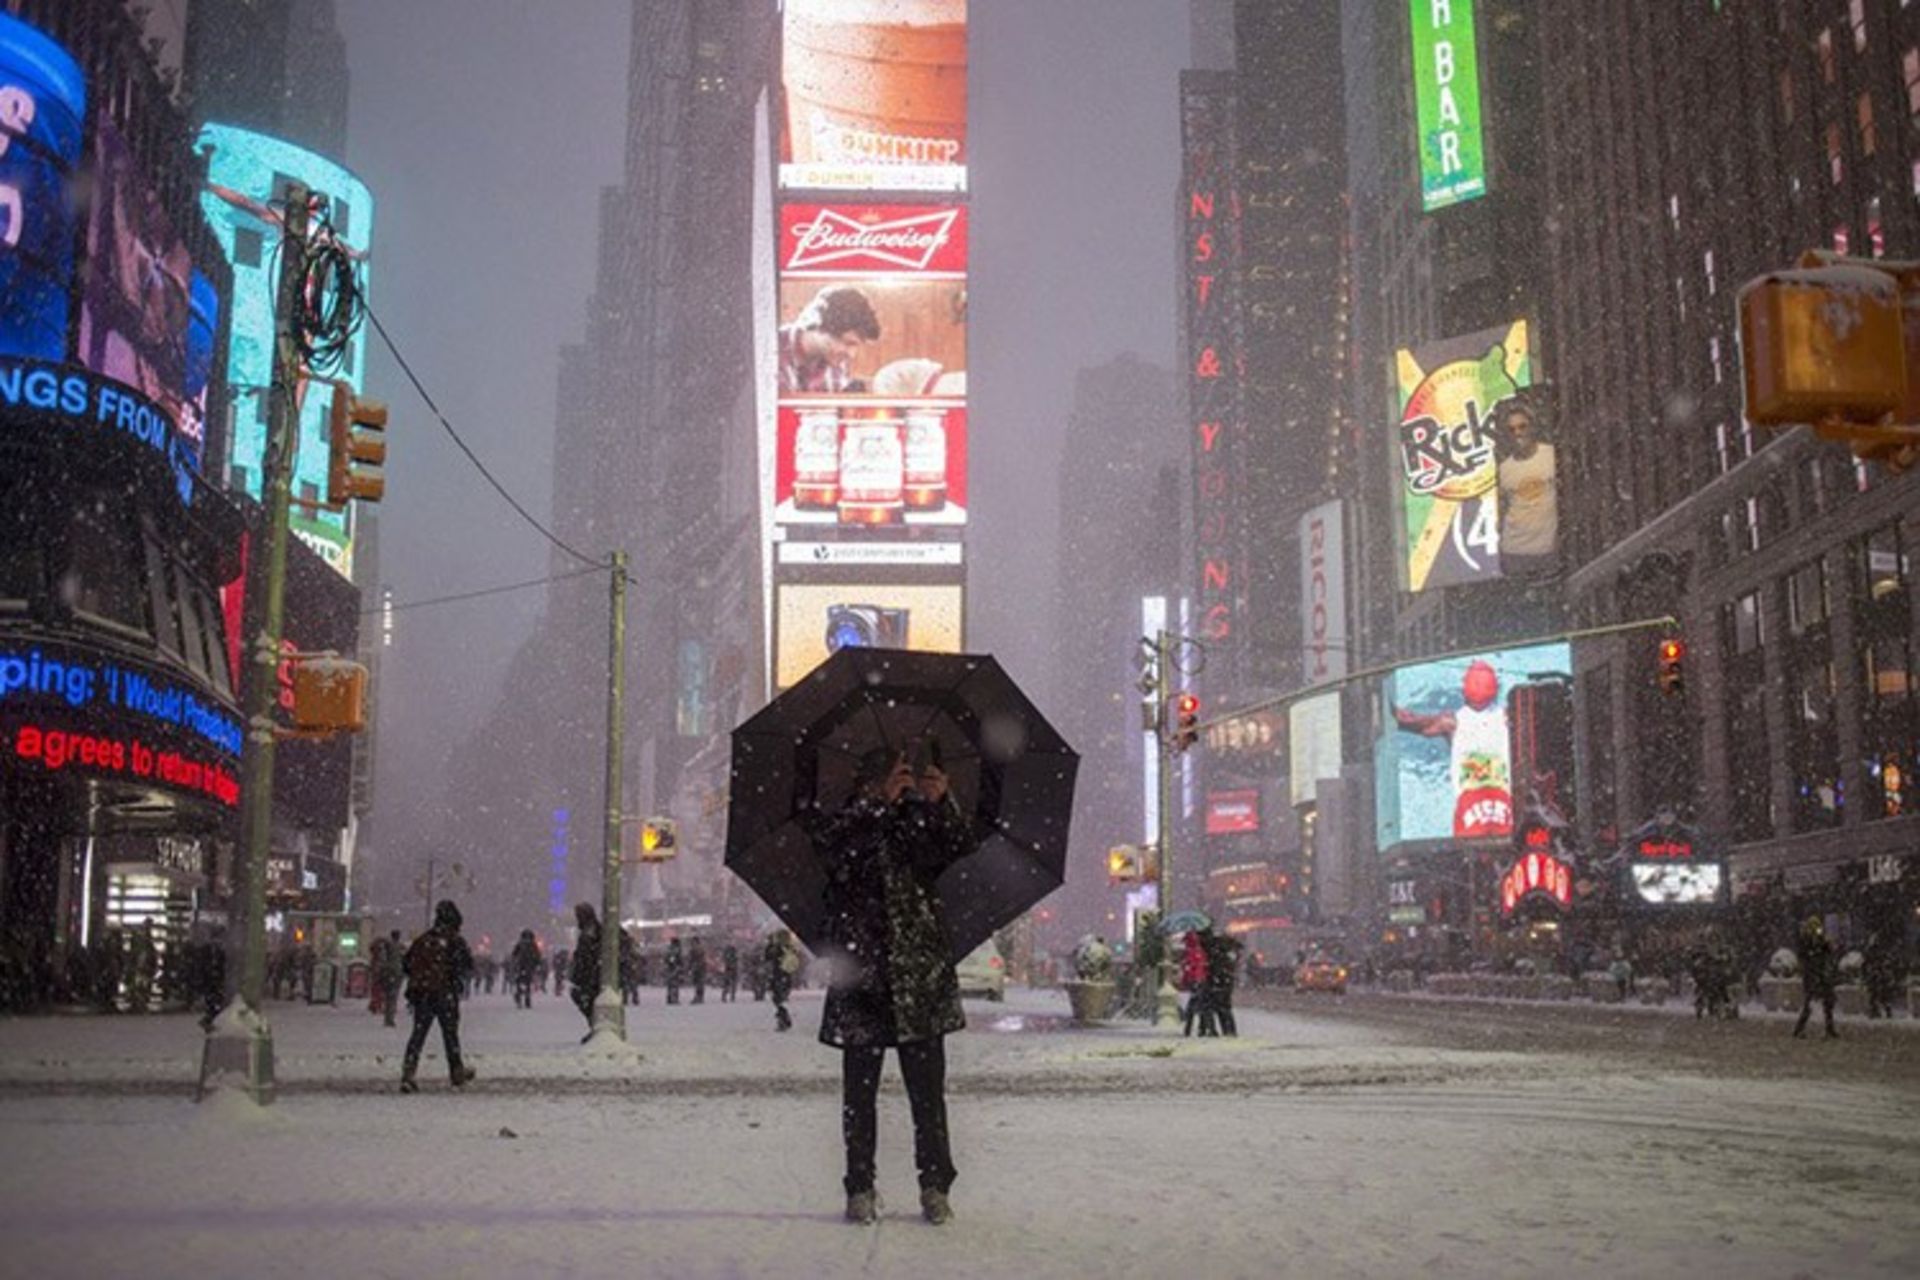 13 a man stands under an umbrella while photographing a snow storm in times square new york s f06c8